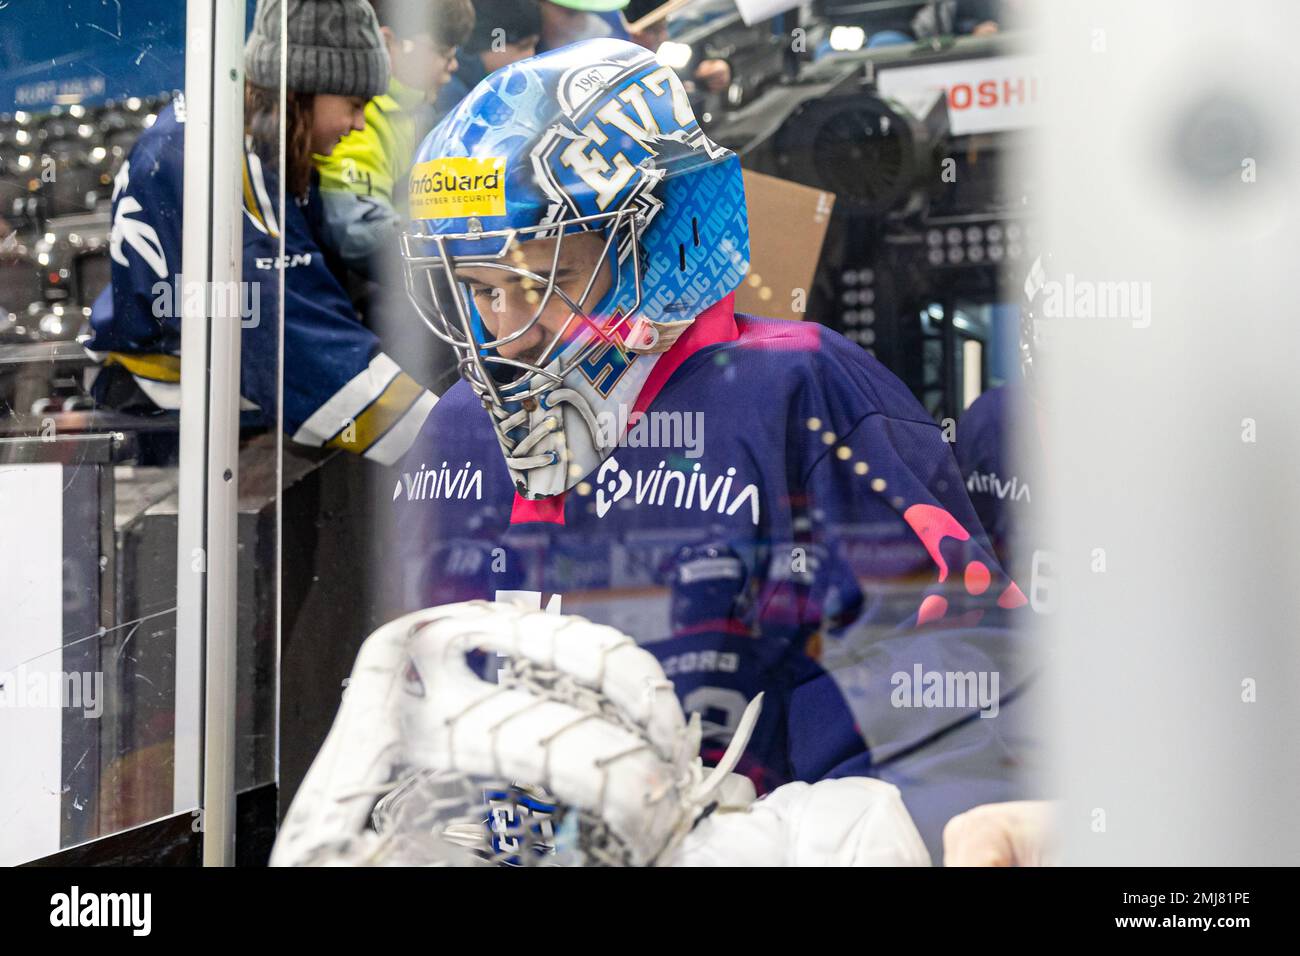 Goalkeeper Luca Hollenstein #51 (EV Zug) during the National League Regular Season ice hockey game between EV Zug and SC Bern on January 27th, 2023 in the Bossard Arena in Zug